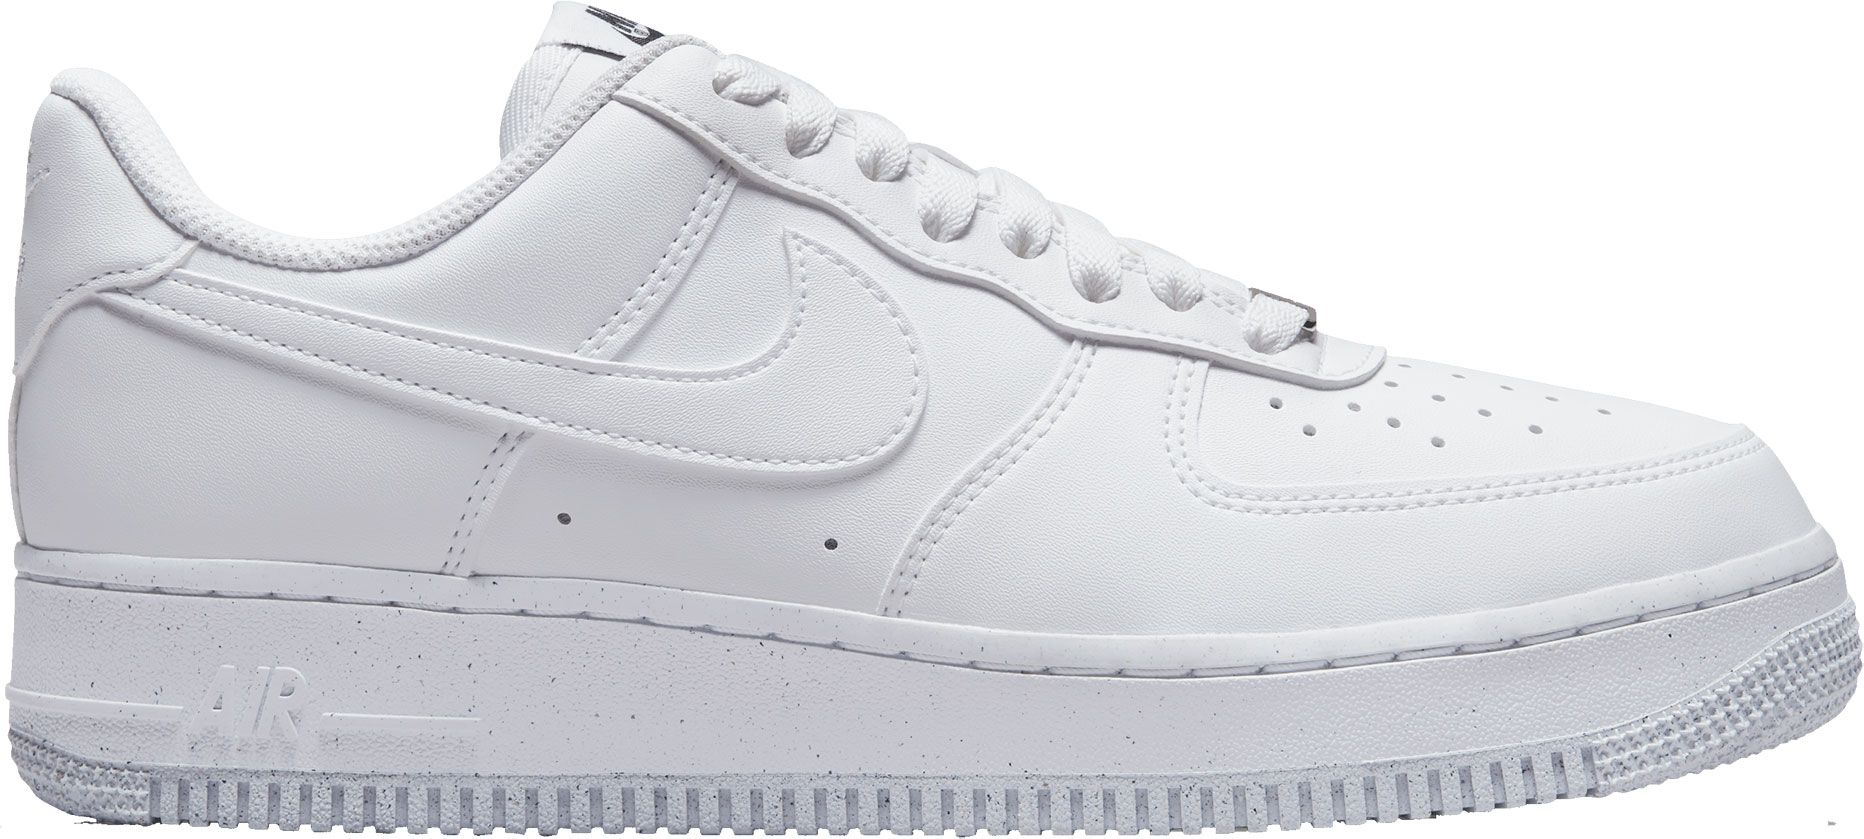 places that sell air force 1s near me